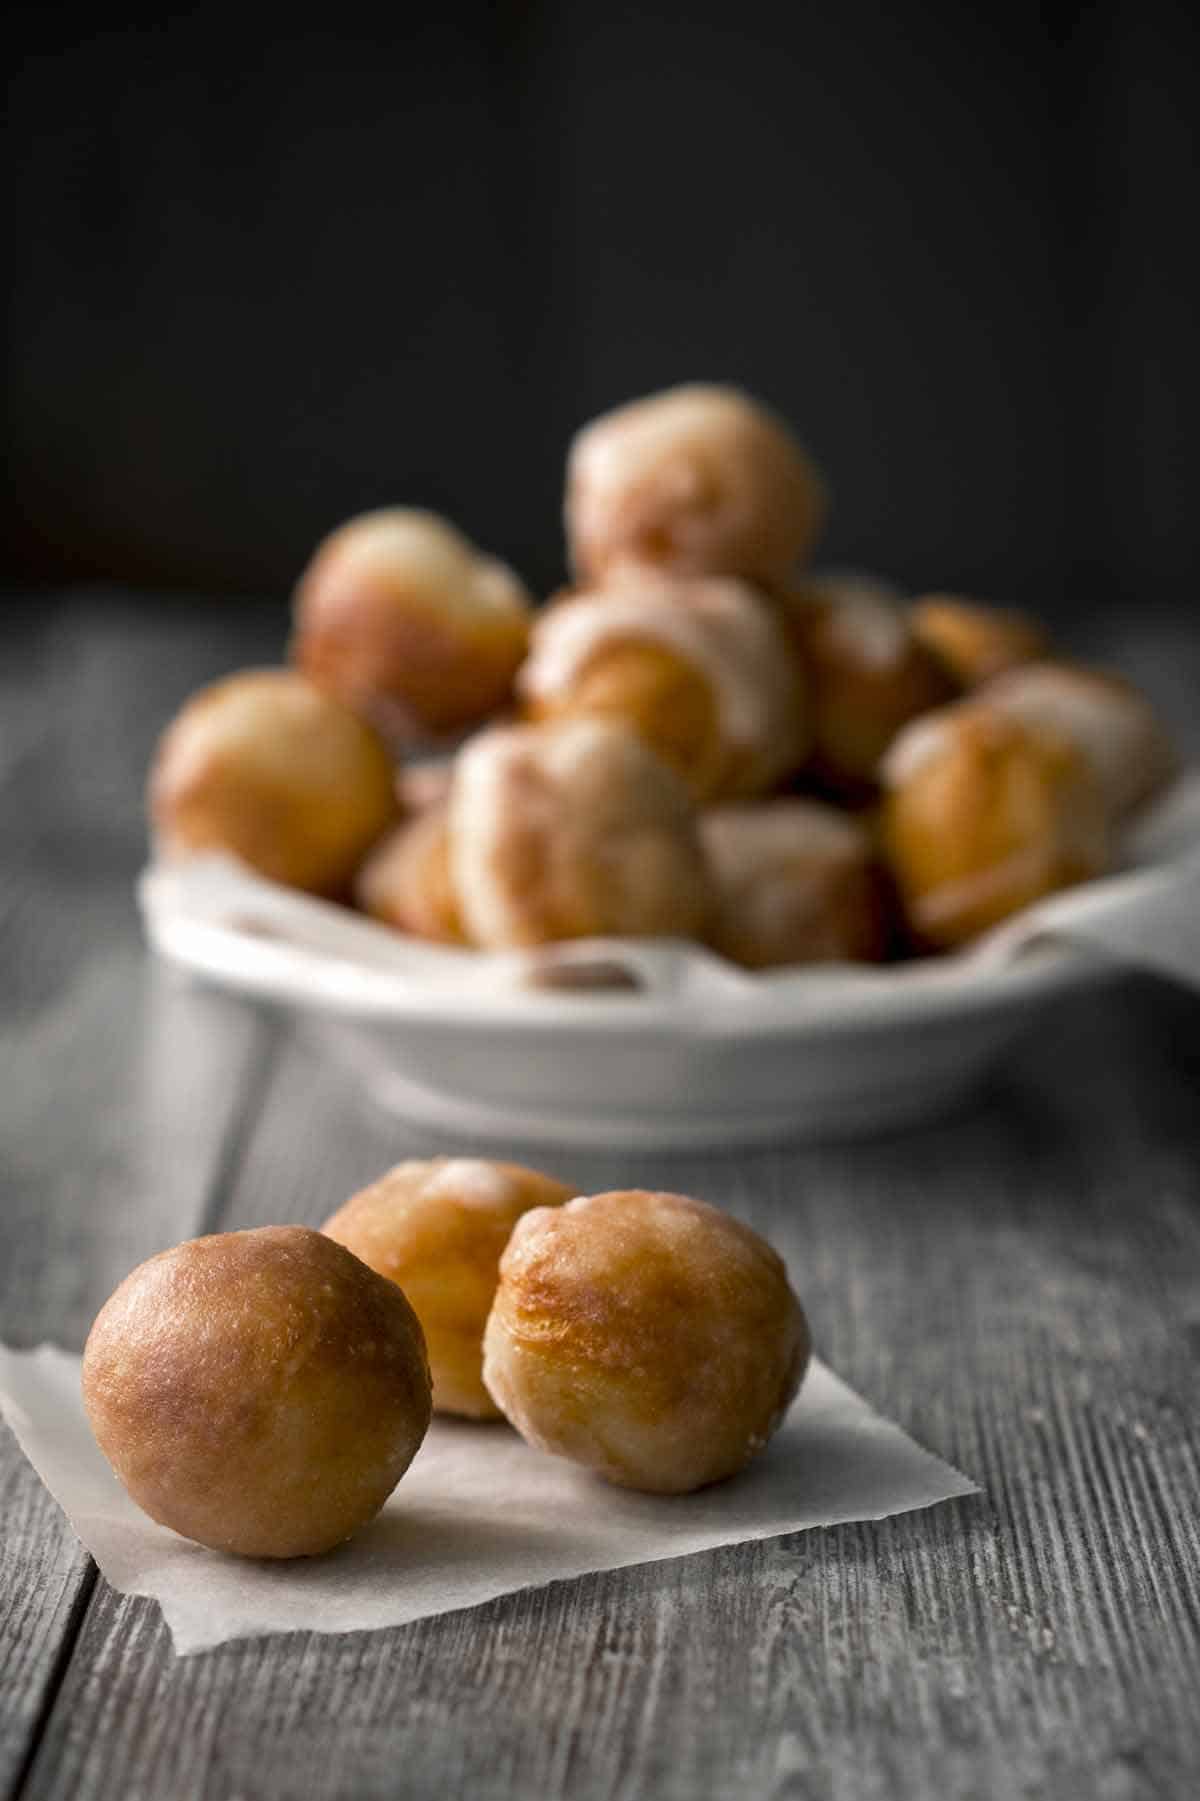 Serving bowl of donut holes with 3 donut holes on a parchment sheet in the foreground.